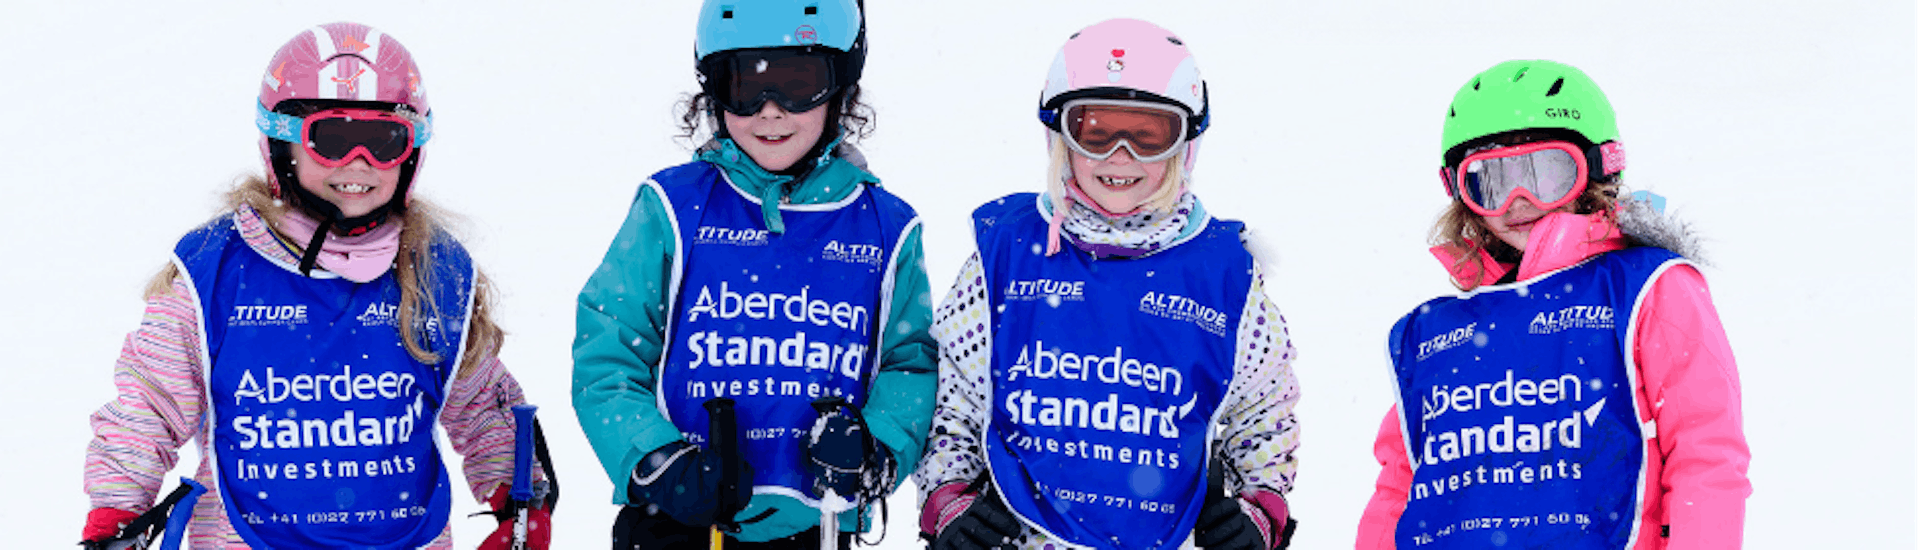 A group of kids having fun in Zermatt at the kids ski lessons (6-15 y.) for all levels with Altitude Ski School Zermatt.